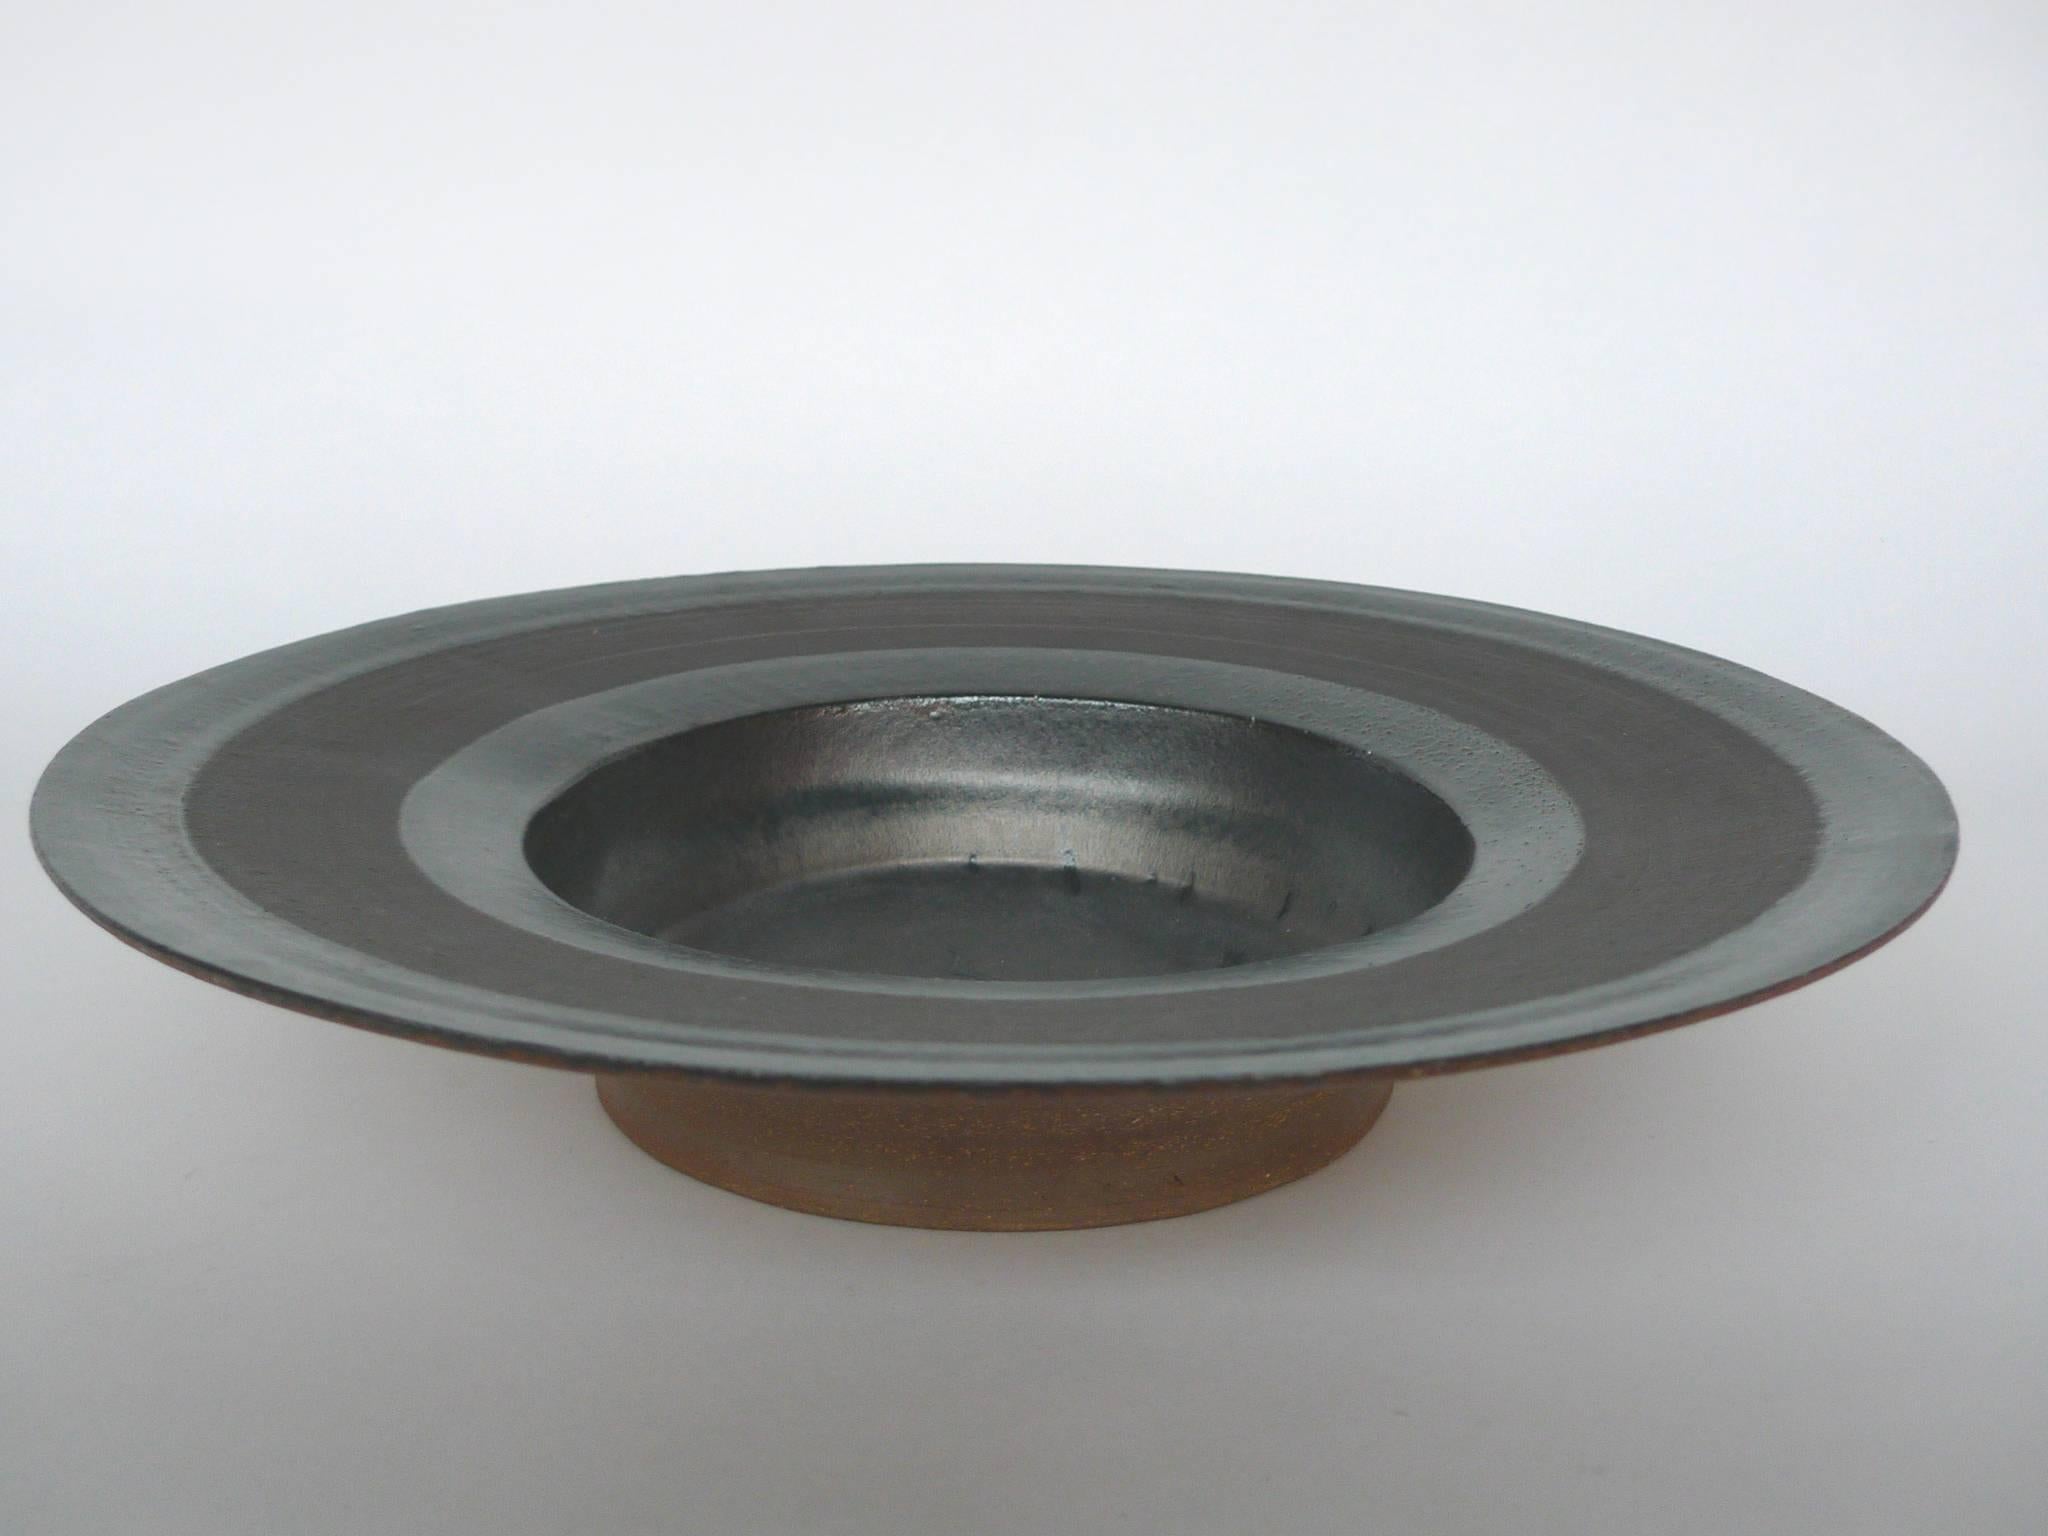 This ceramic saucer bowl is by Thom Lussier. It's part of a series of pottery on which the artist applies a mixture of glazing techniques to create richly textured surfaces. The top and interior sections of this saucer bowl combine metallic and